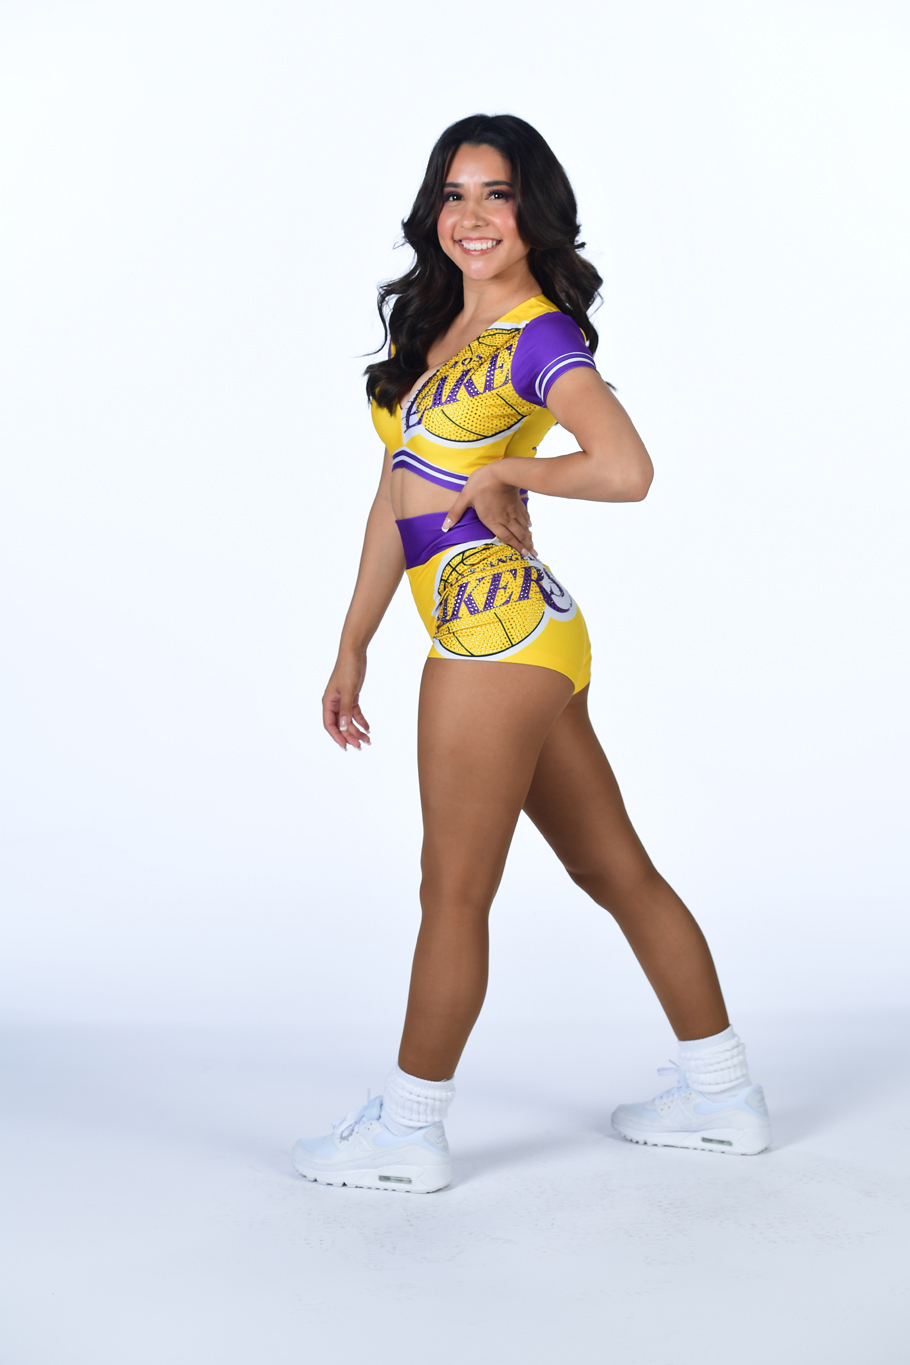 Los Angeles Lakers - The Laker Girls got into the Halloween spirit